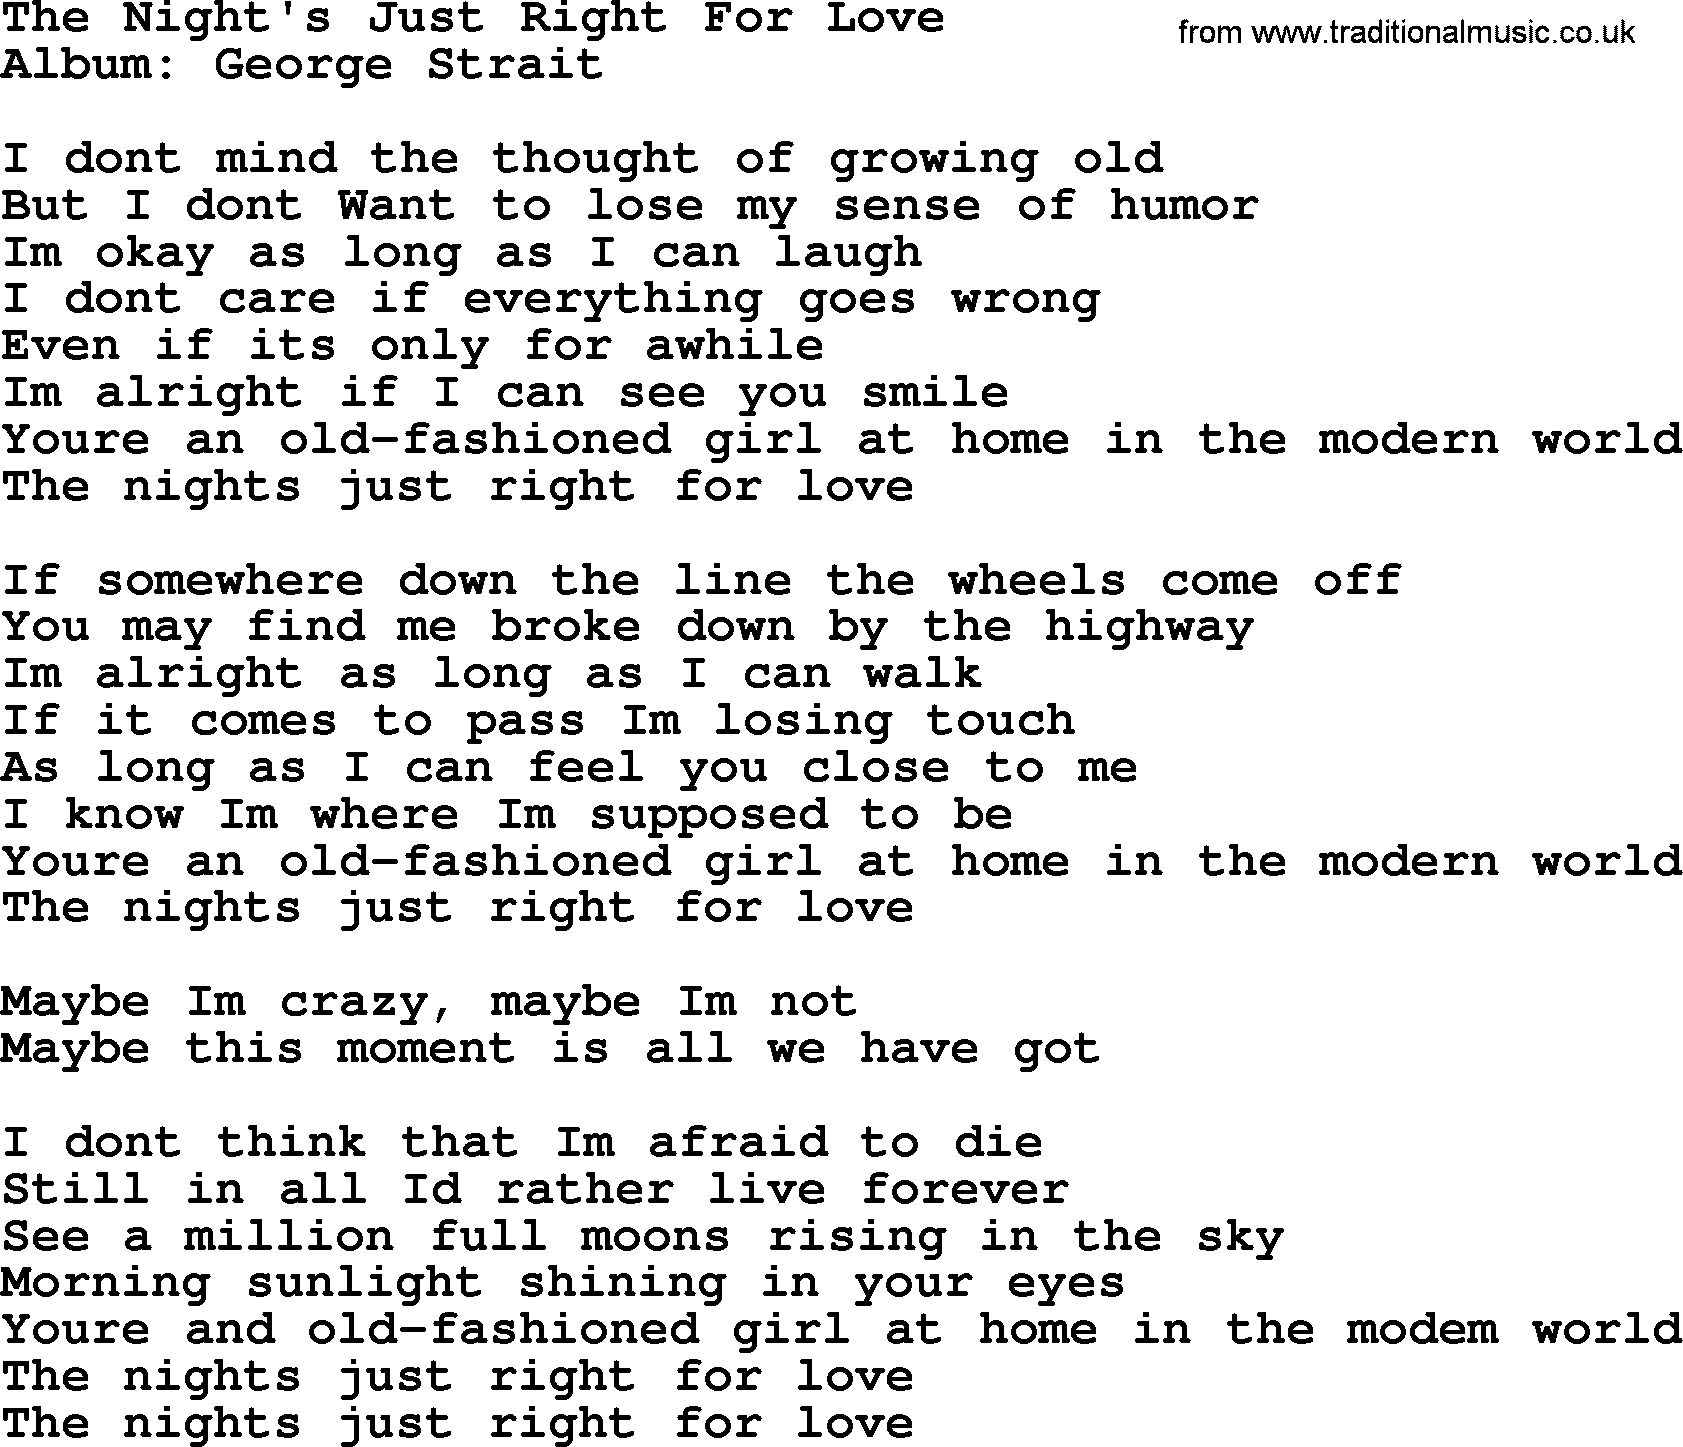 George Strait song: The Night's Just Right For Love, lyrics